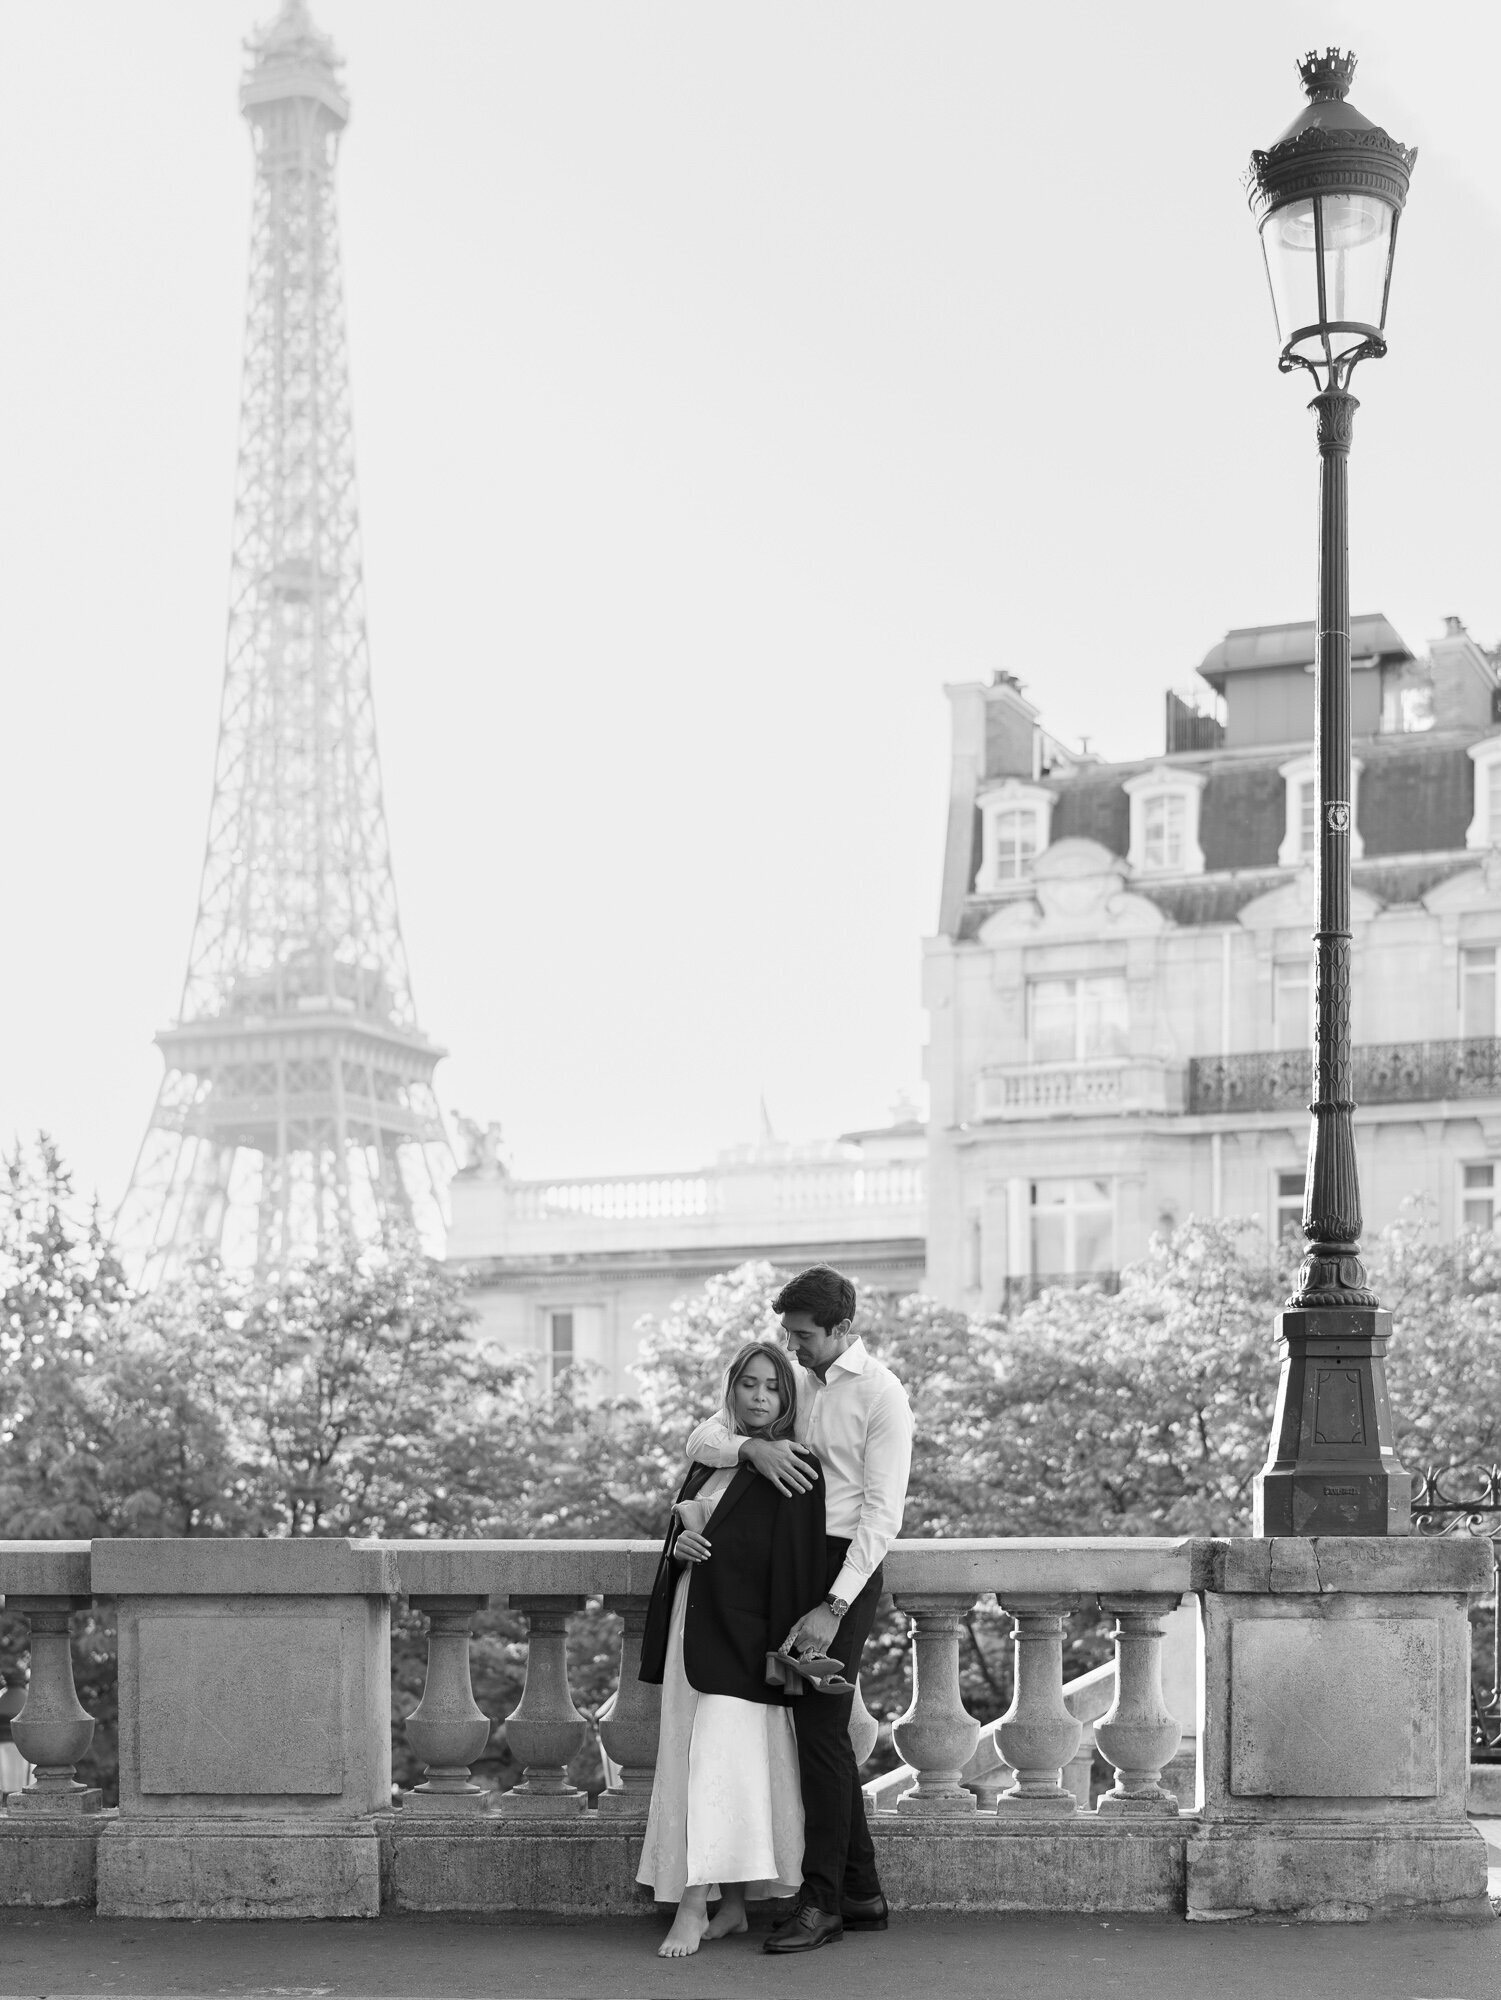 Christine & Kyle Paris Photosession by Tatyana Chaiko photographer in France-87